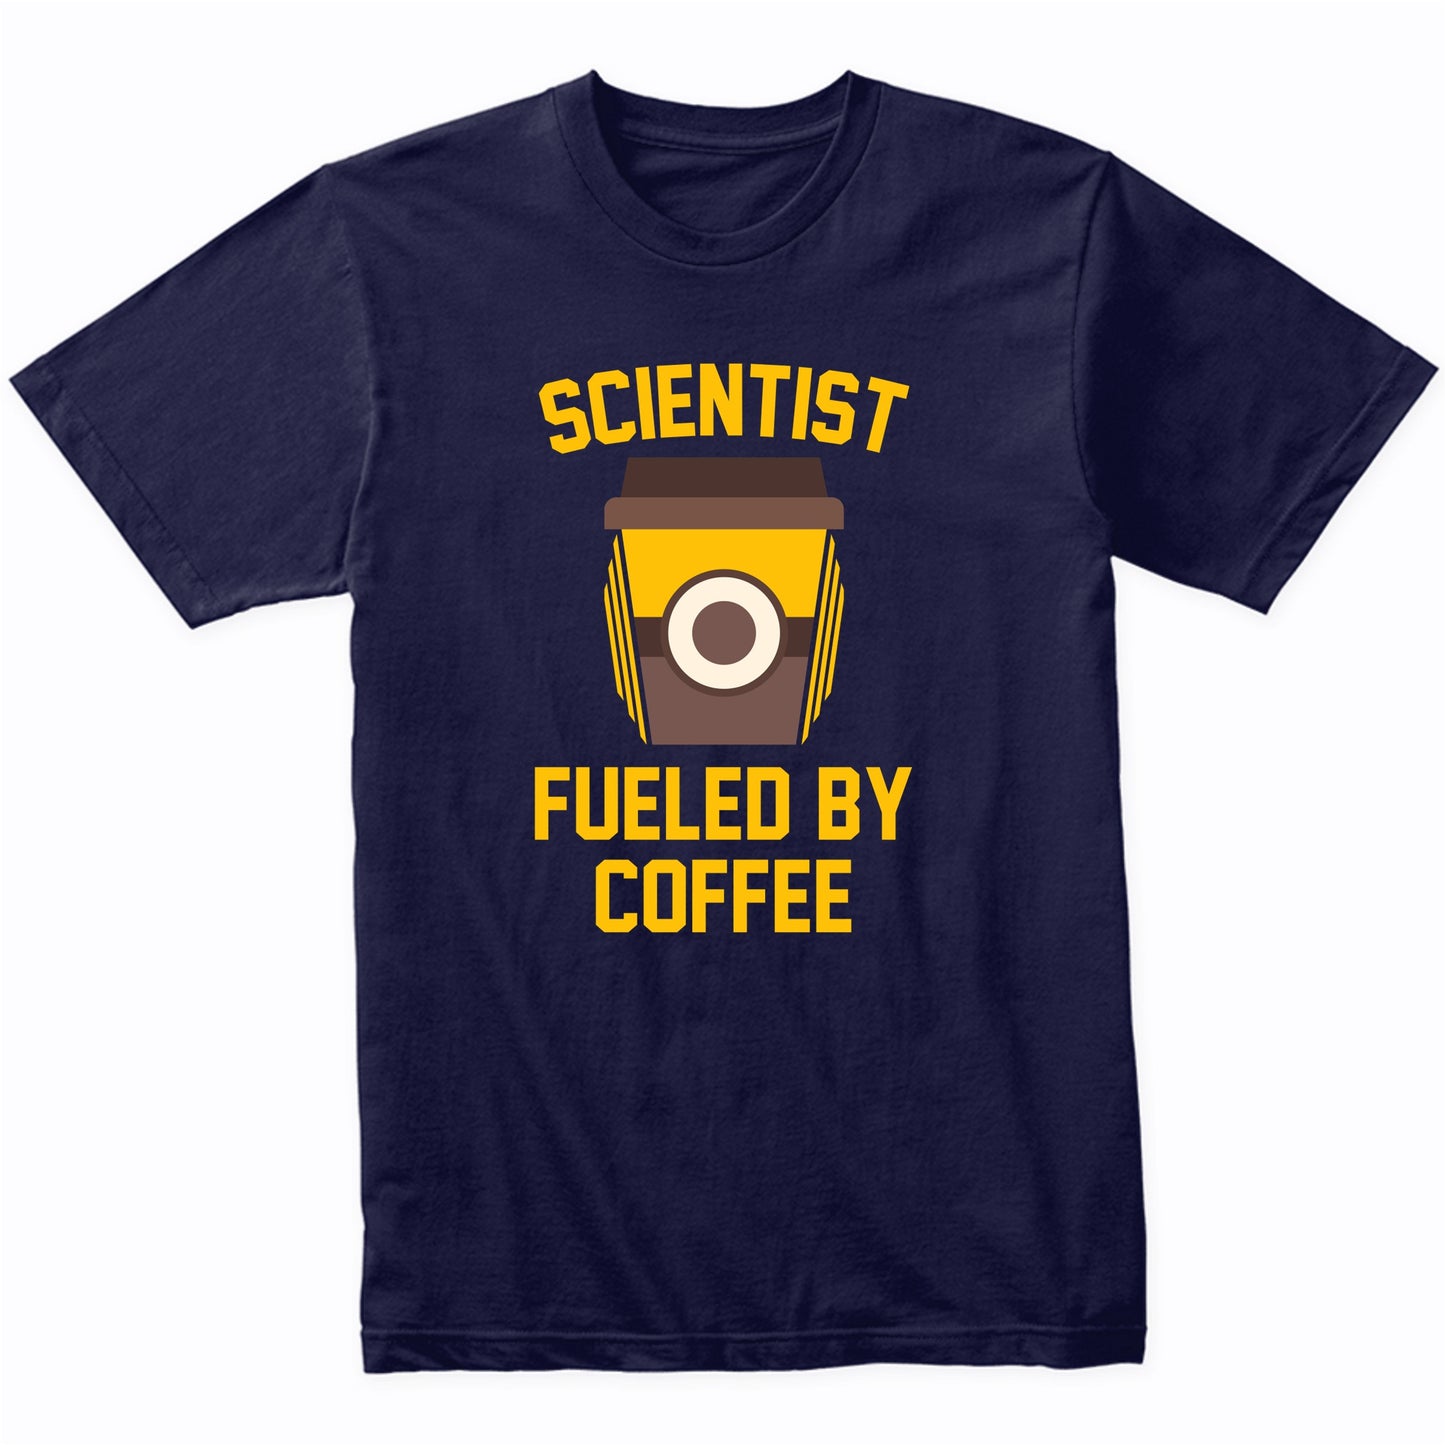 Scientist Fueled By Coffee Funny Science Shirt